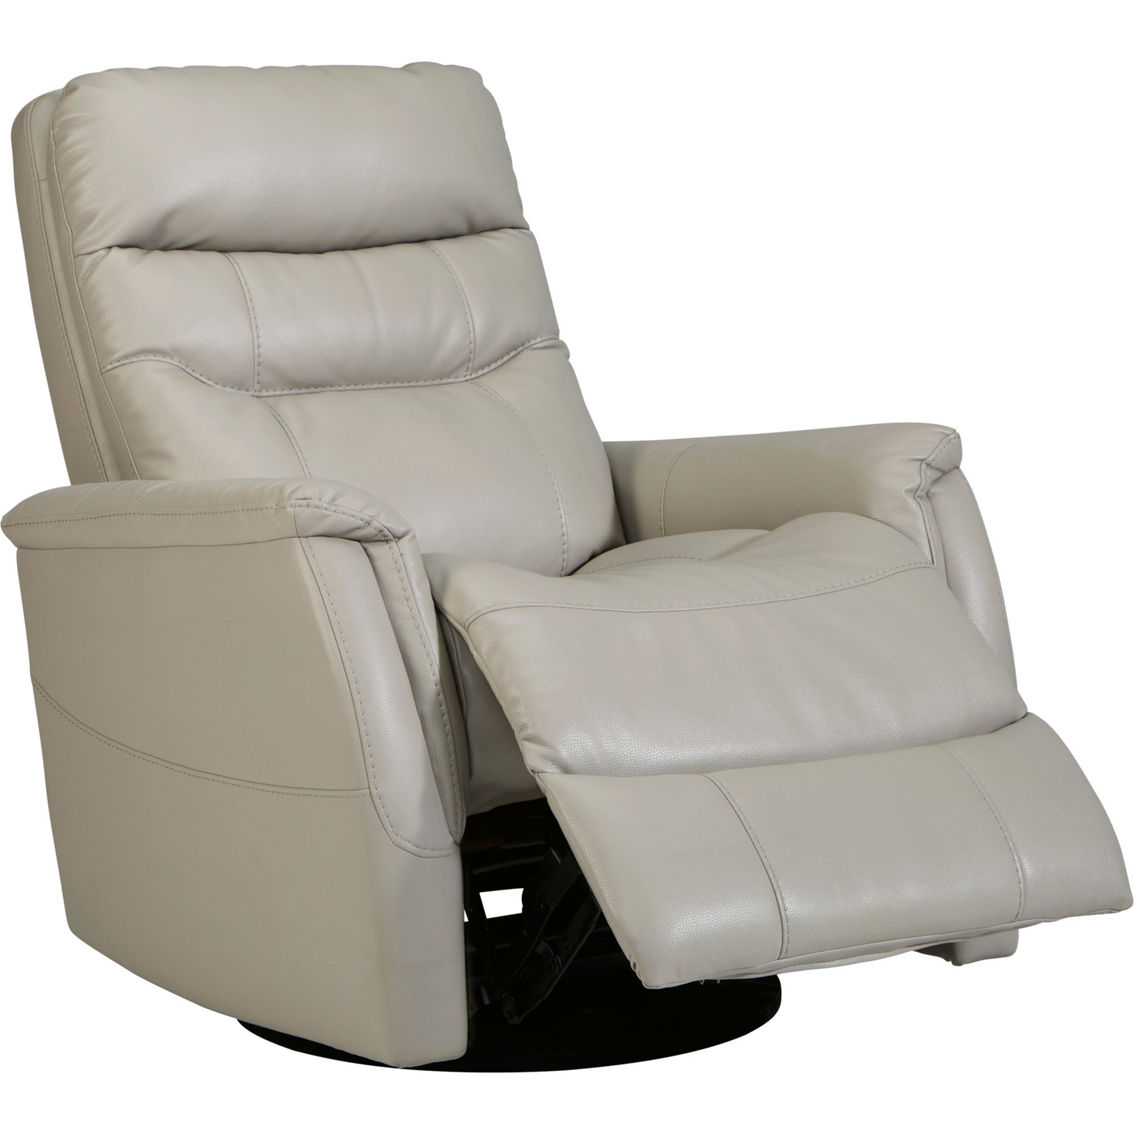 Signature Design by Ashley Riptyme Swivel Glider Recliner - Image 2 of 7